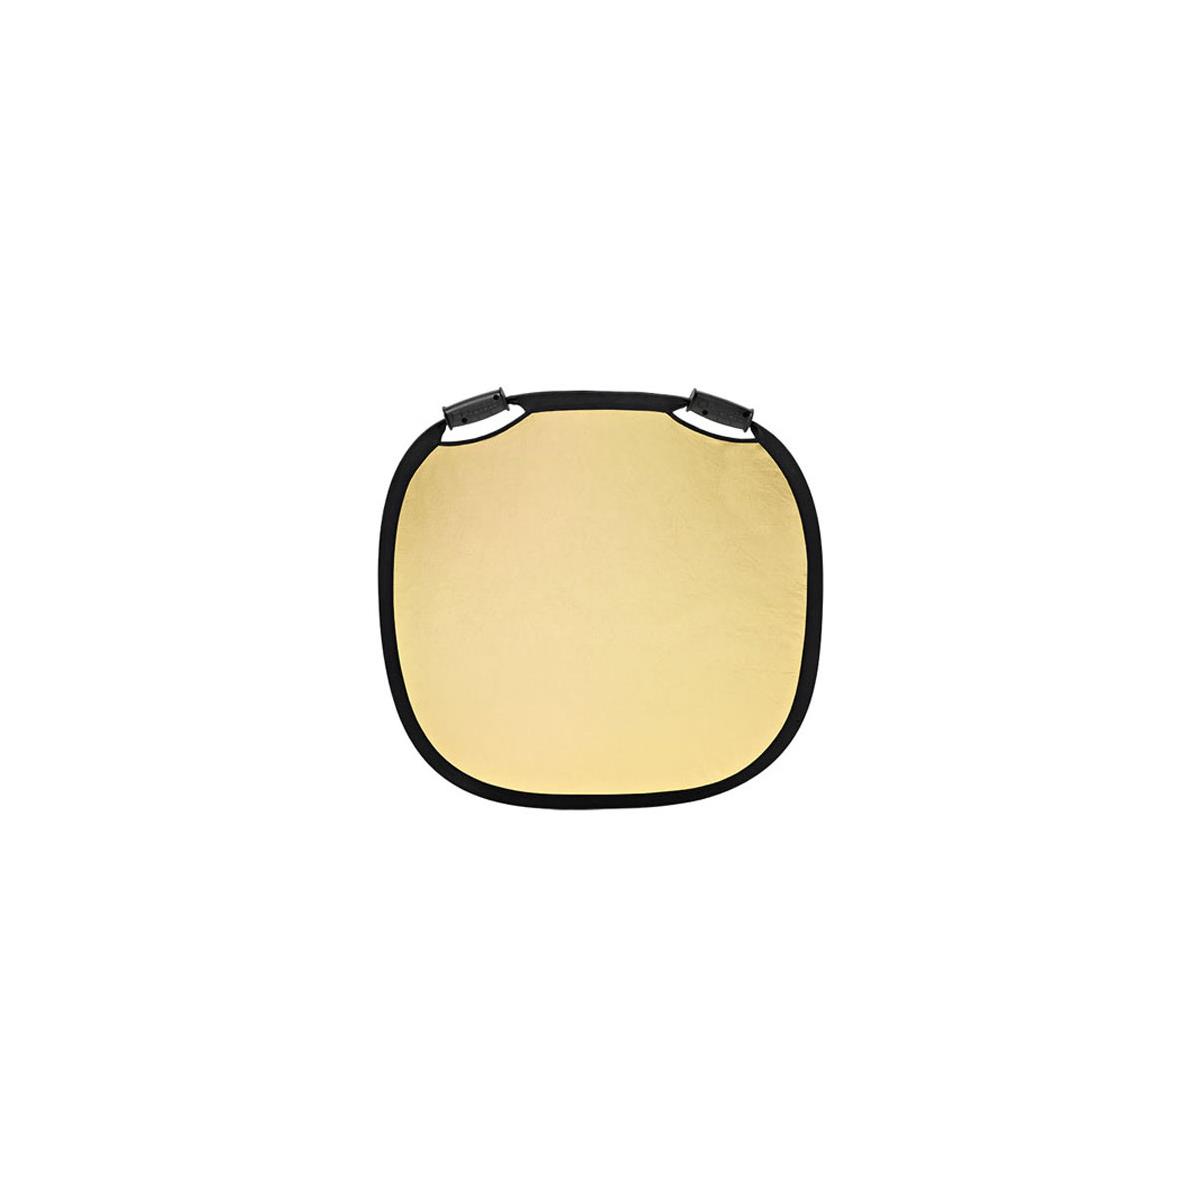 Profoto 100964 Collapsible Reflector -  Gold/White - 32"